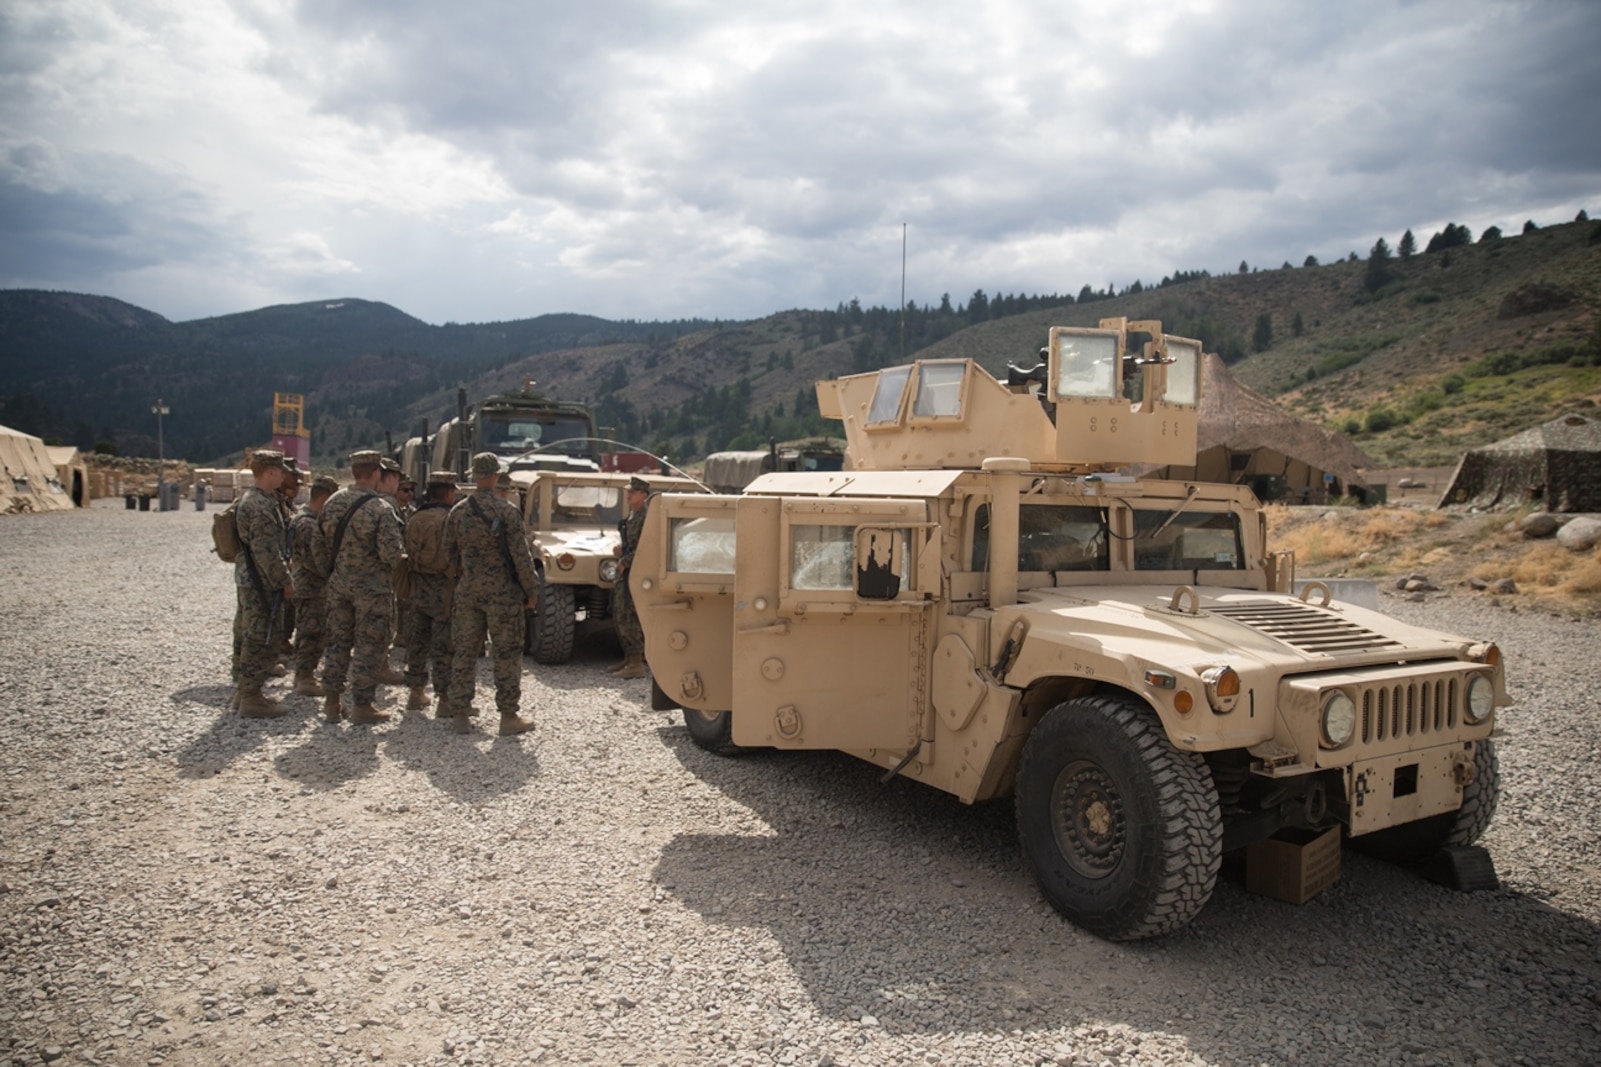 BRIDGEPORT, Calif. - U.S. Marines with Combat Logistics Battalion 5 (CLB-5), Combat Logistics Regiment 1, 1st Marine Logistics Group, receive a brief prior to a convoy during Mountain Training Exercise 4-17 at the Marine Corps Mountain Warfare Training Center Aug. 1, 2017. Information is passed down from the non-commissioned officers to the junior Marines to ensure they know where to go and what to do. (U.S. Marine Corps photo by Lance Cpl. Timothy Shoemaker)